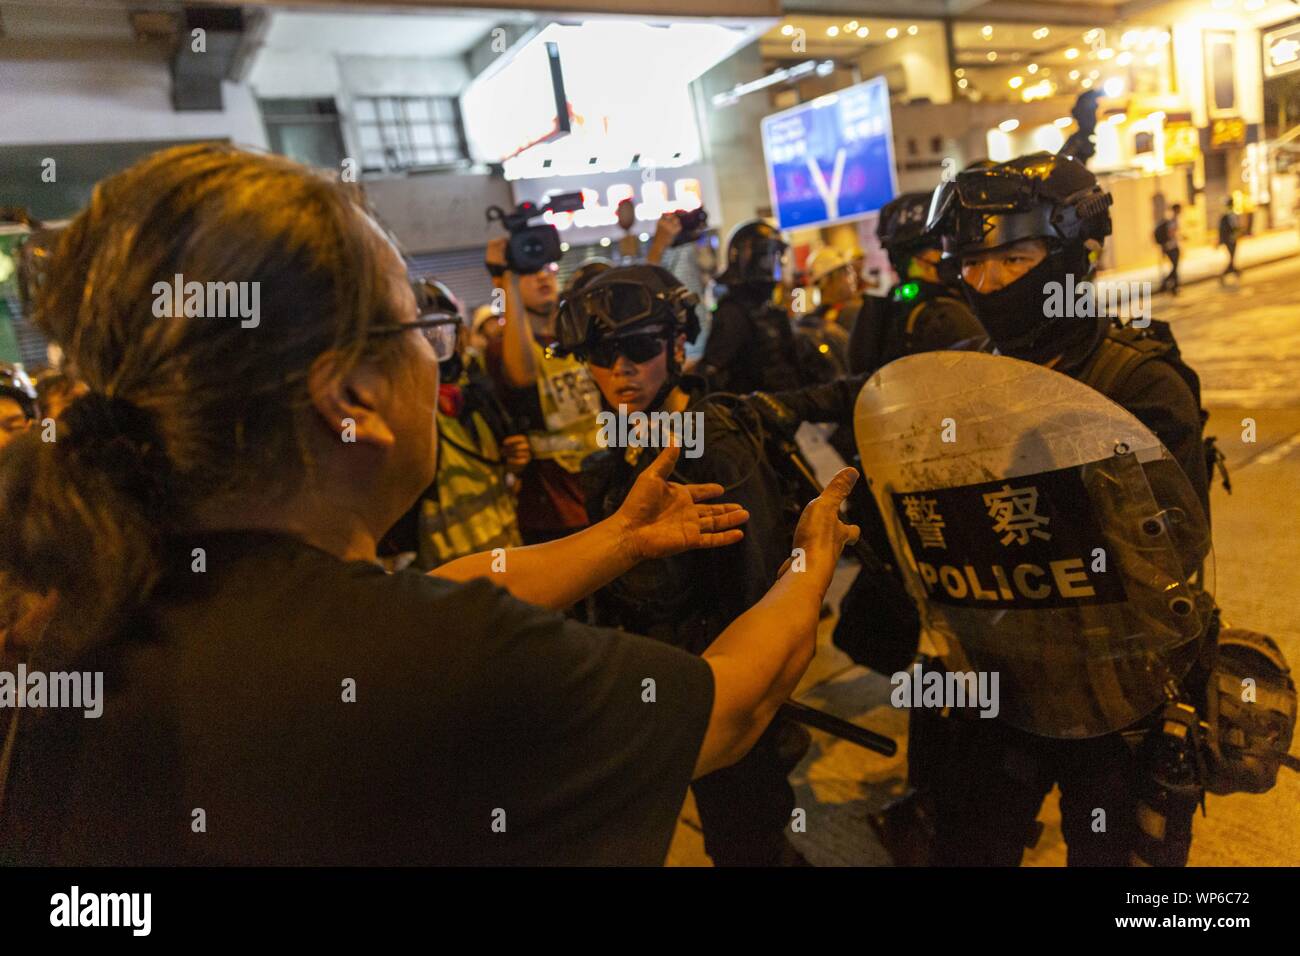 Hong Kong, China. 7th Sep, 2019. A pro democracy protester implores police to show restraint as he walks towards them. Hundred of protesters and members of the publicgathered for yet another night in front of the Mongkok police station in order to continue demanding the release of the cctv footage from the Prince Edward MTR station, the site of an alleged brutal police crackdown on suspected protesters and members of the public. Credit: Adryel Talamantes/ZUMA Wire/Alamy Live News Stock Photo